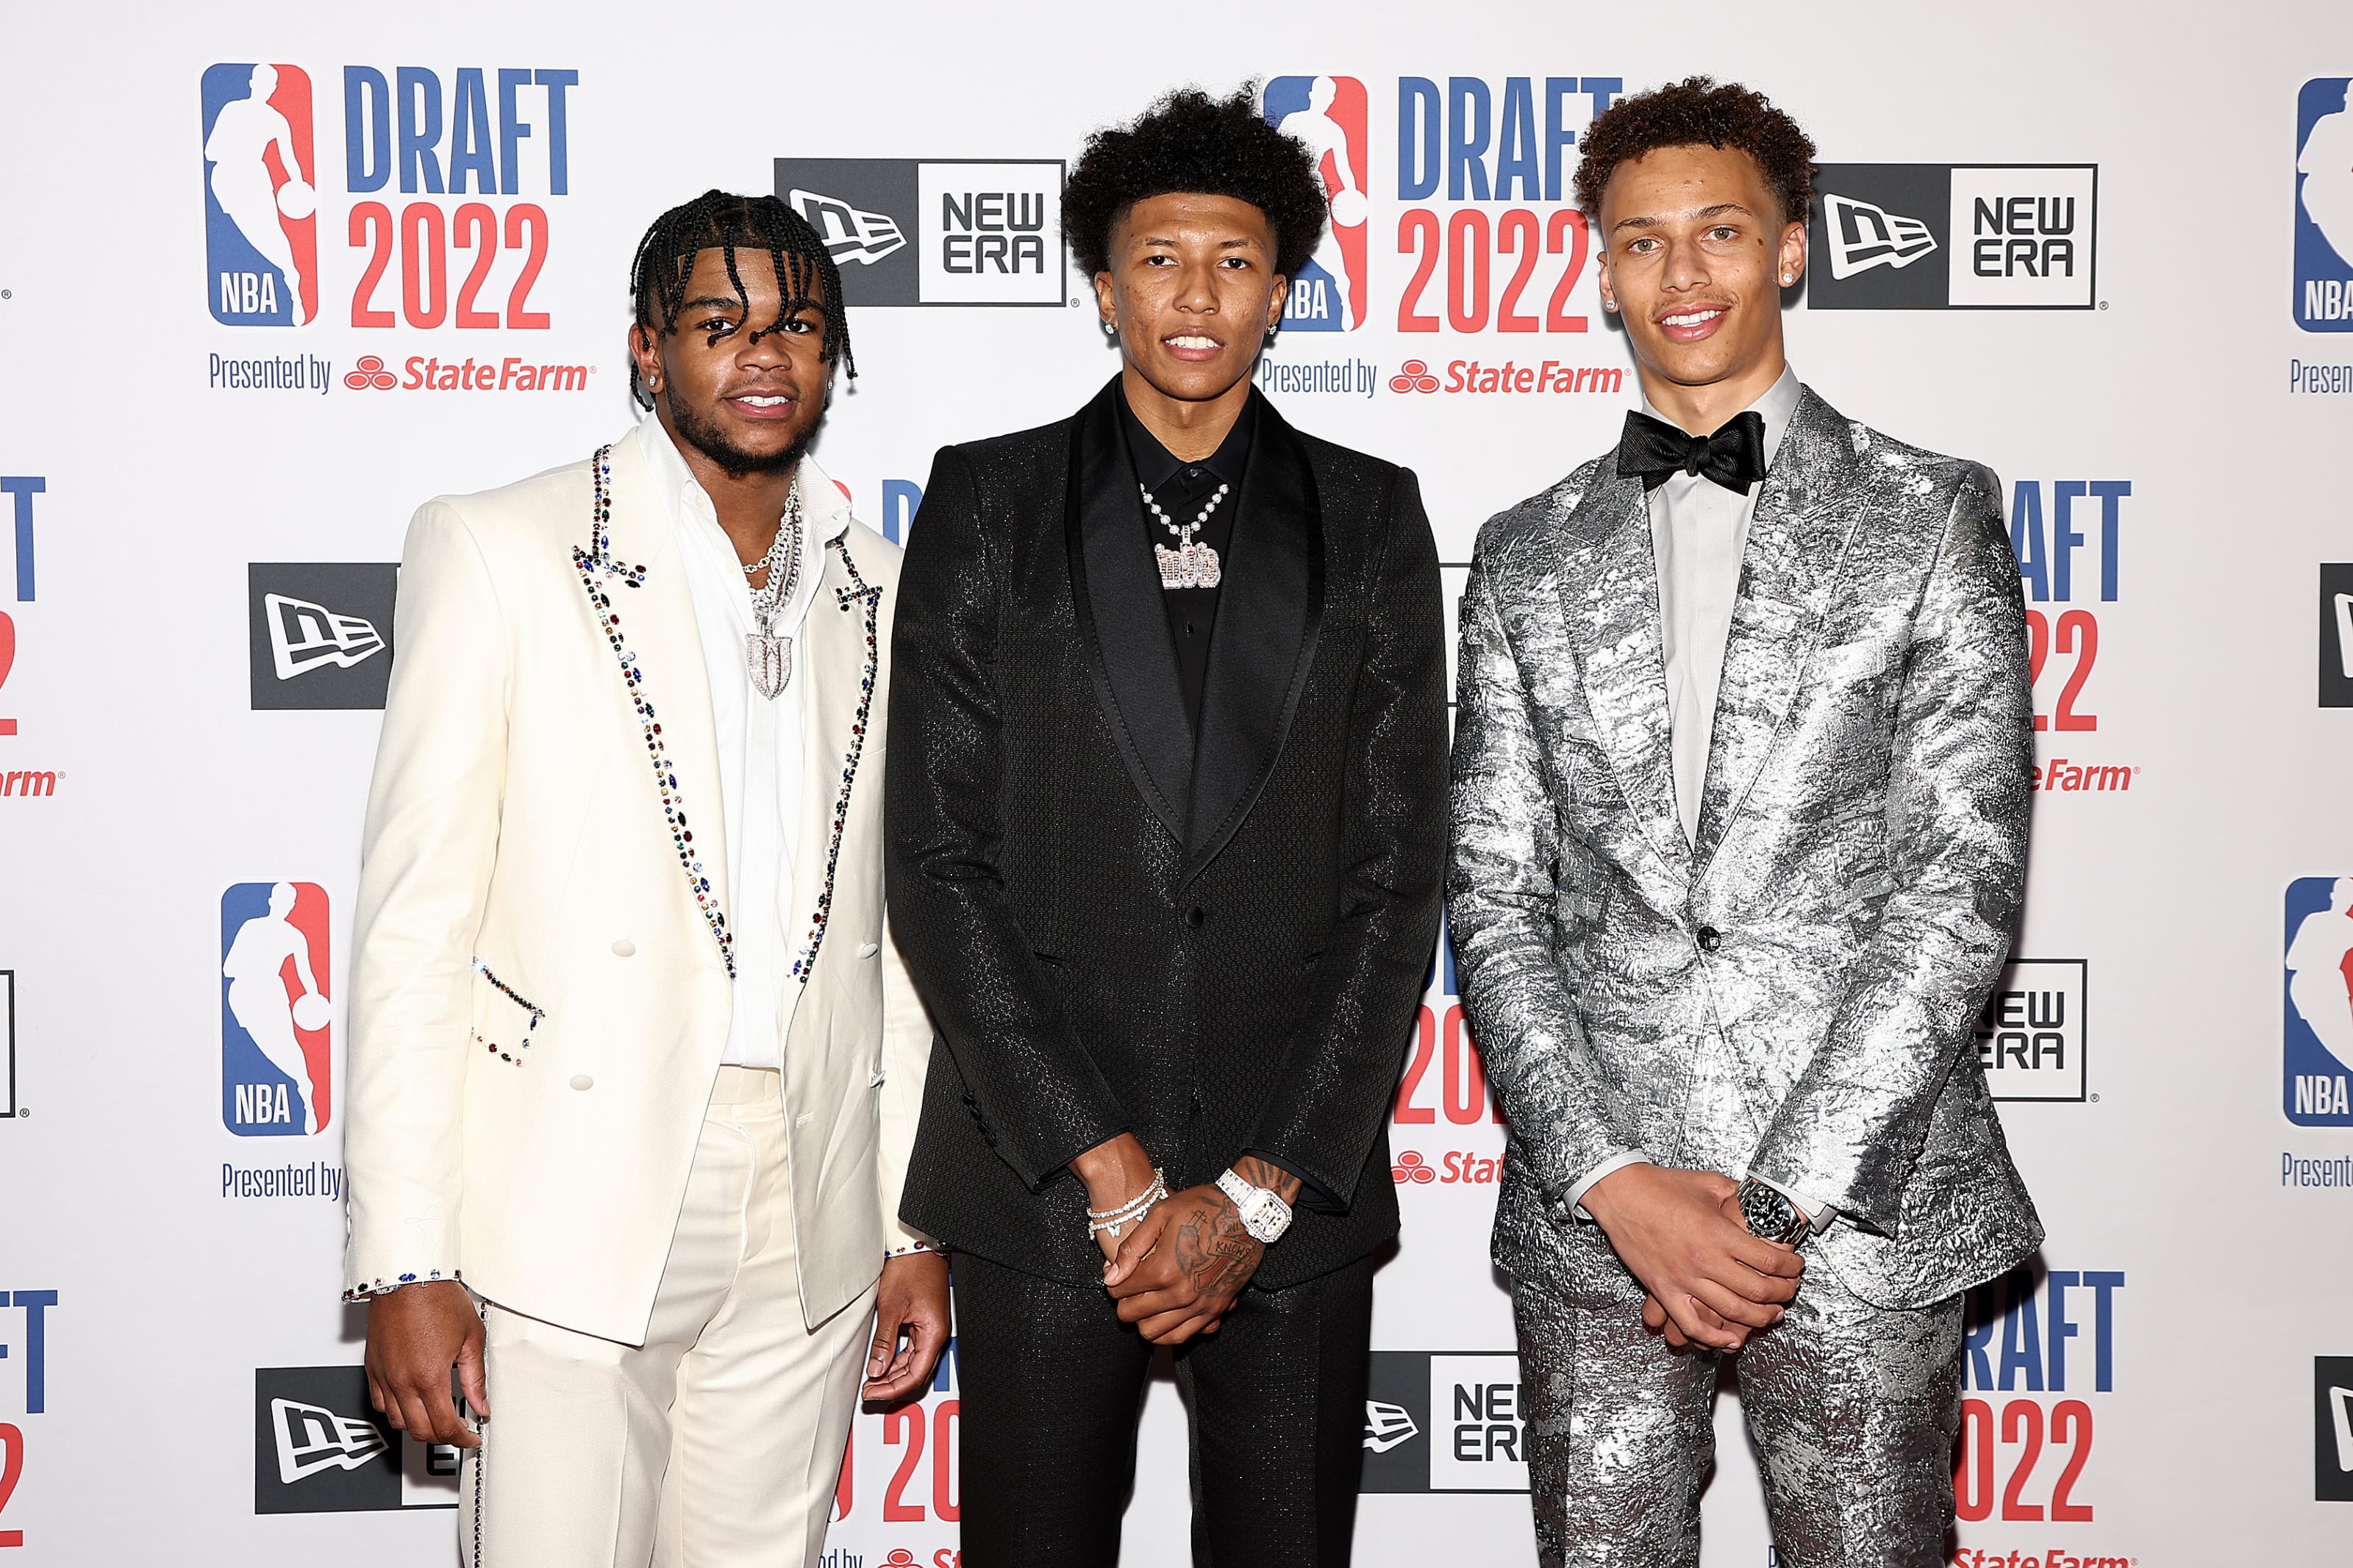 2022 NBA Draft Grades for all 15 teams in the Western Conference